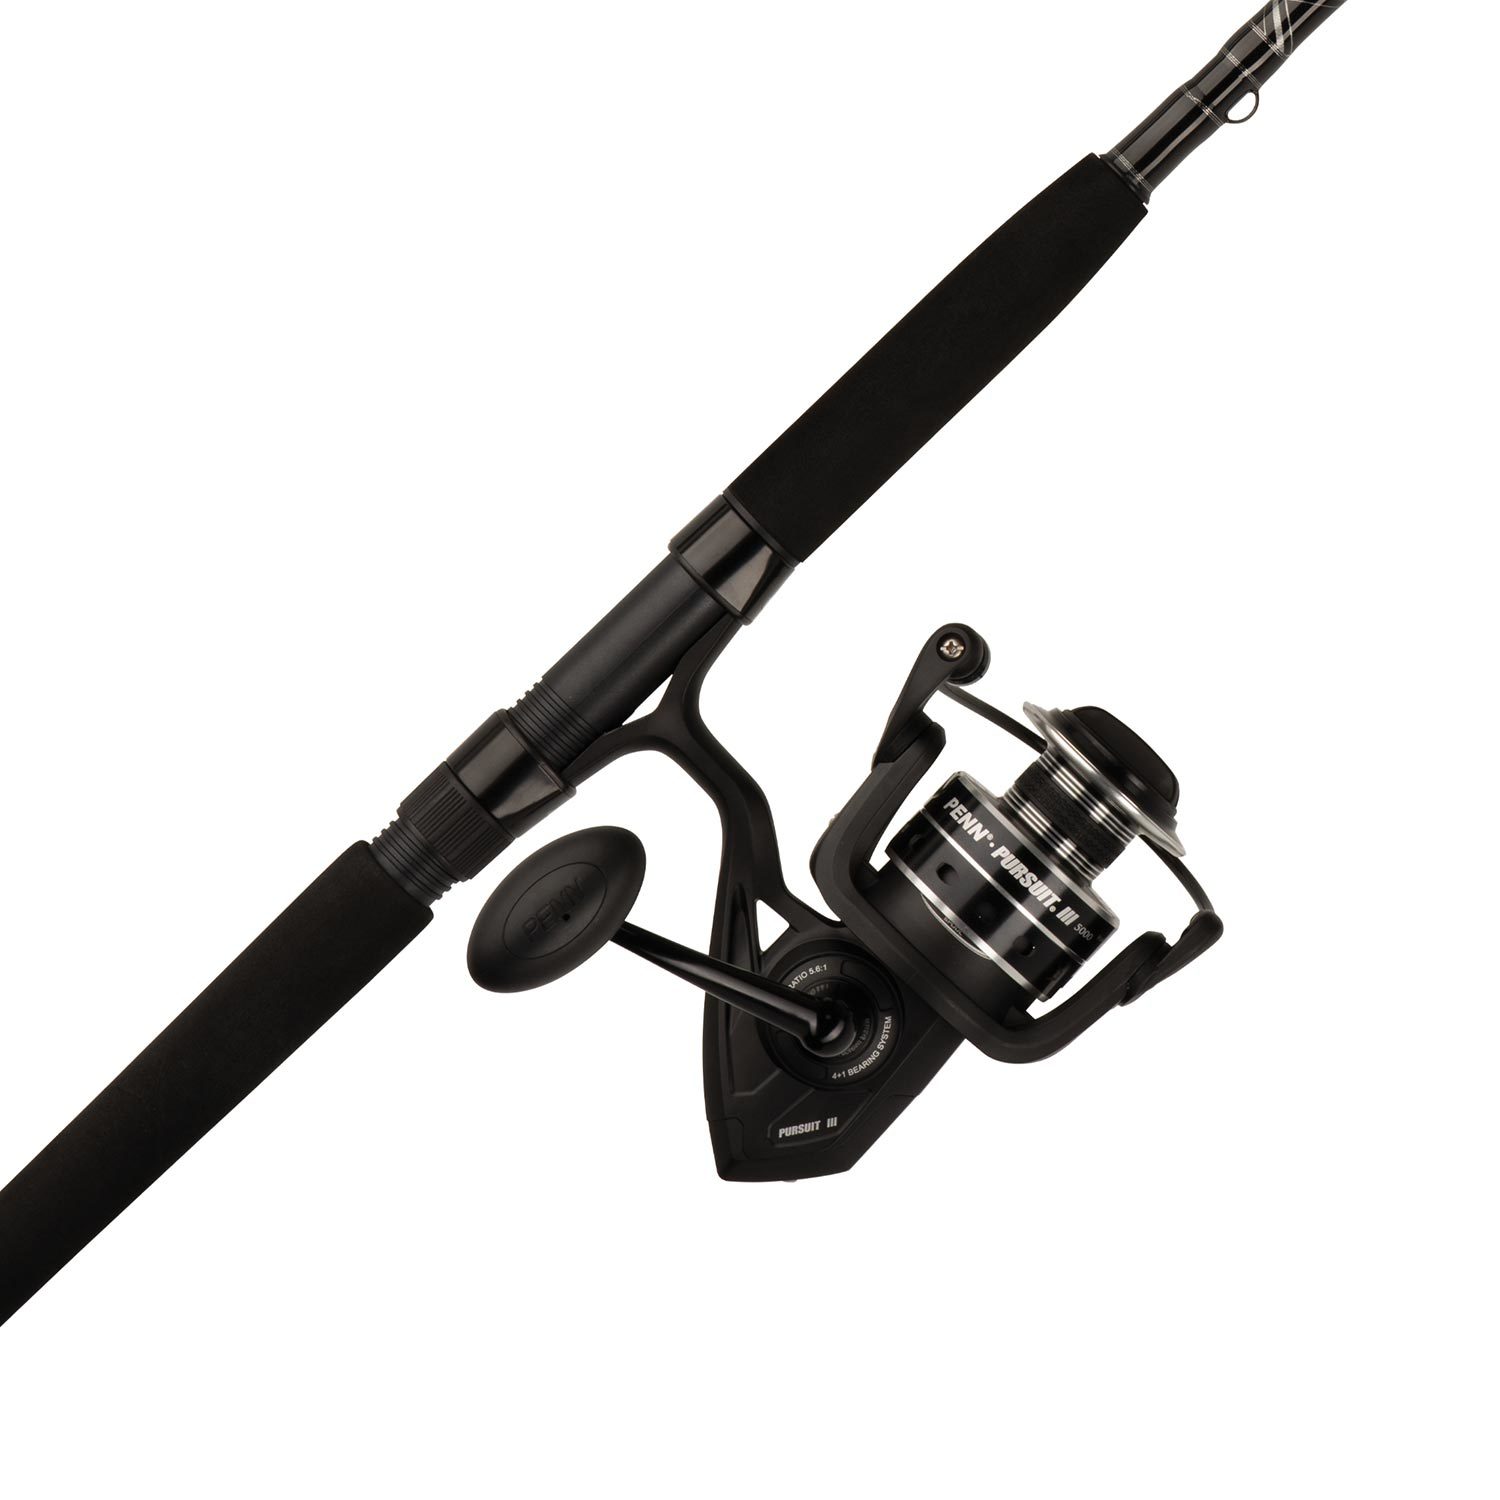 POWER PRO SSV2 30 Lb 1500 Yd Blue – Crook and Crook Fishing